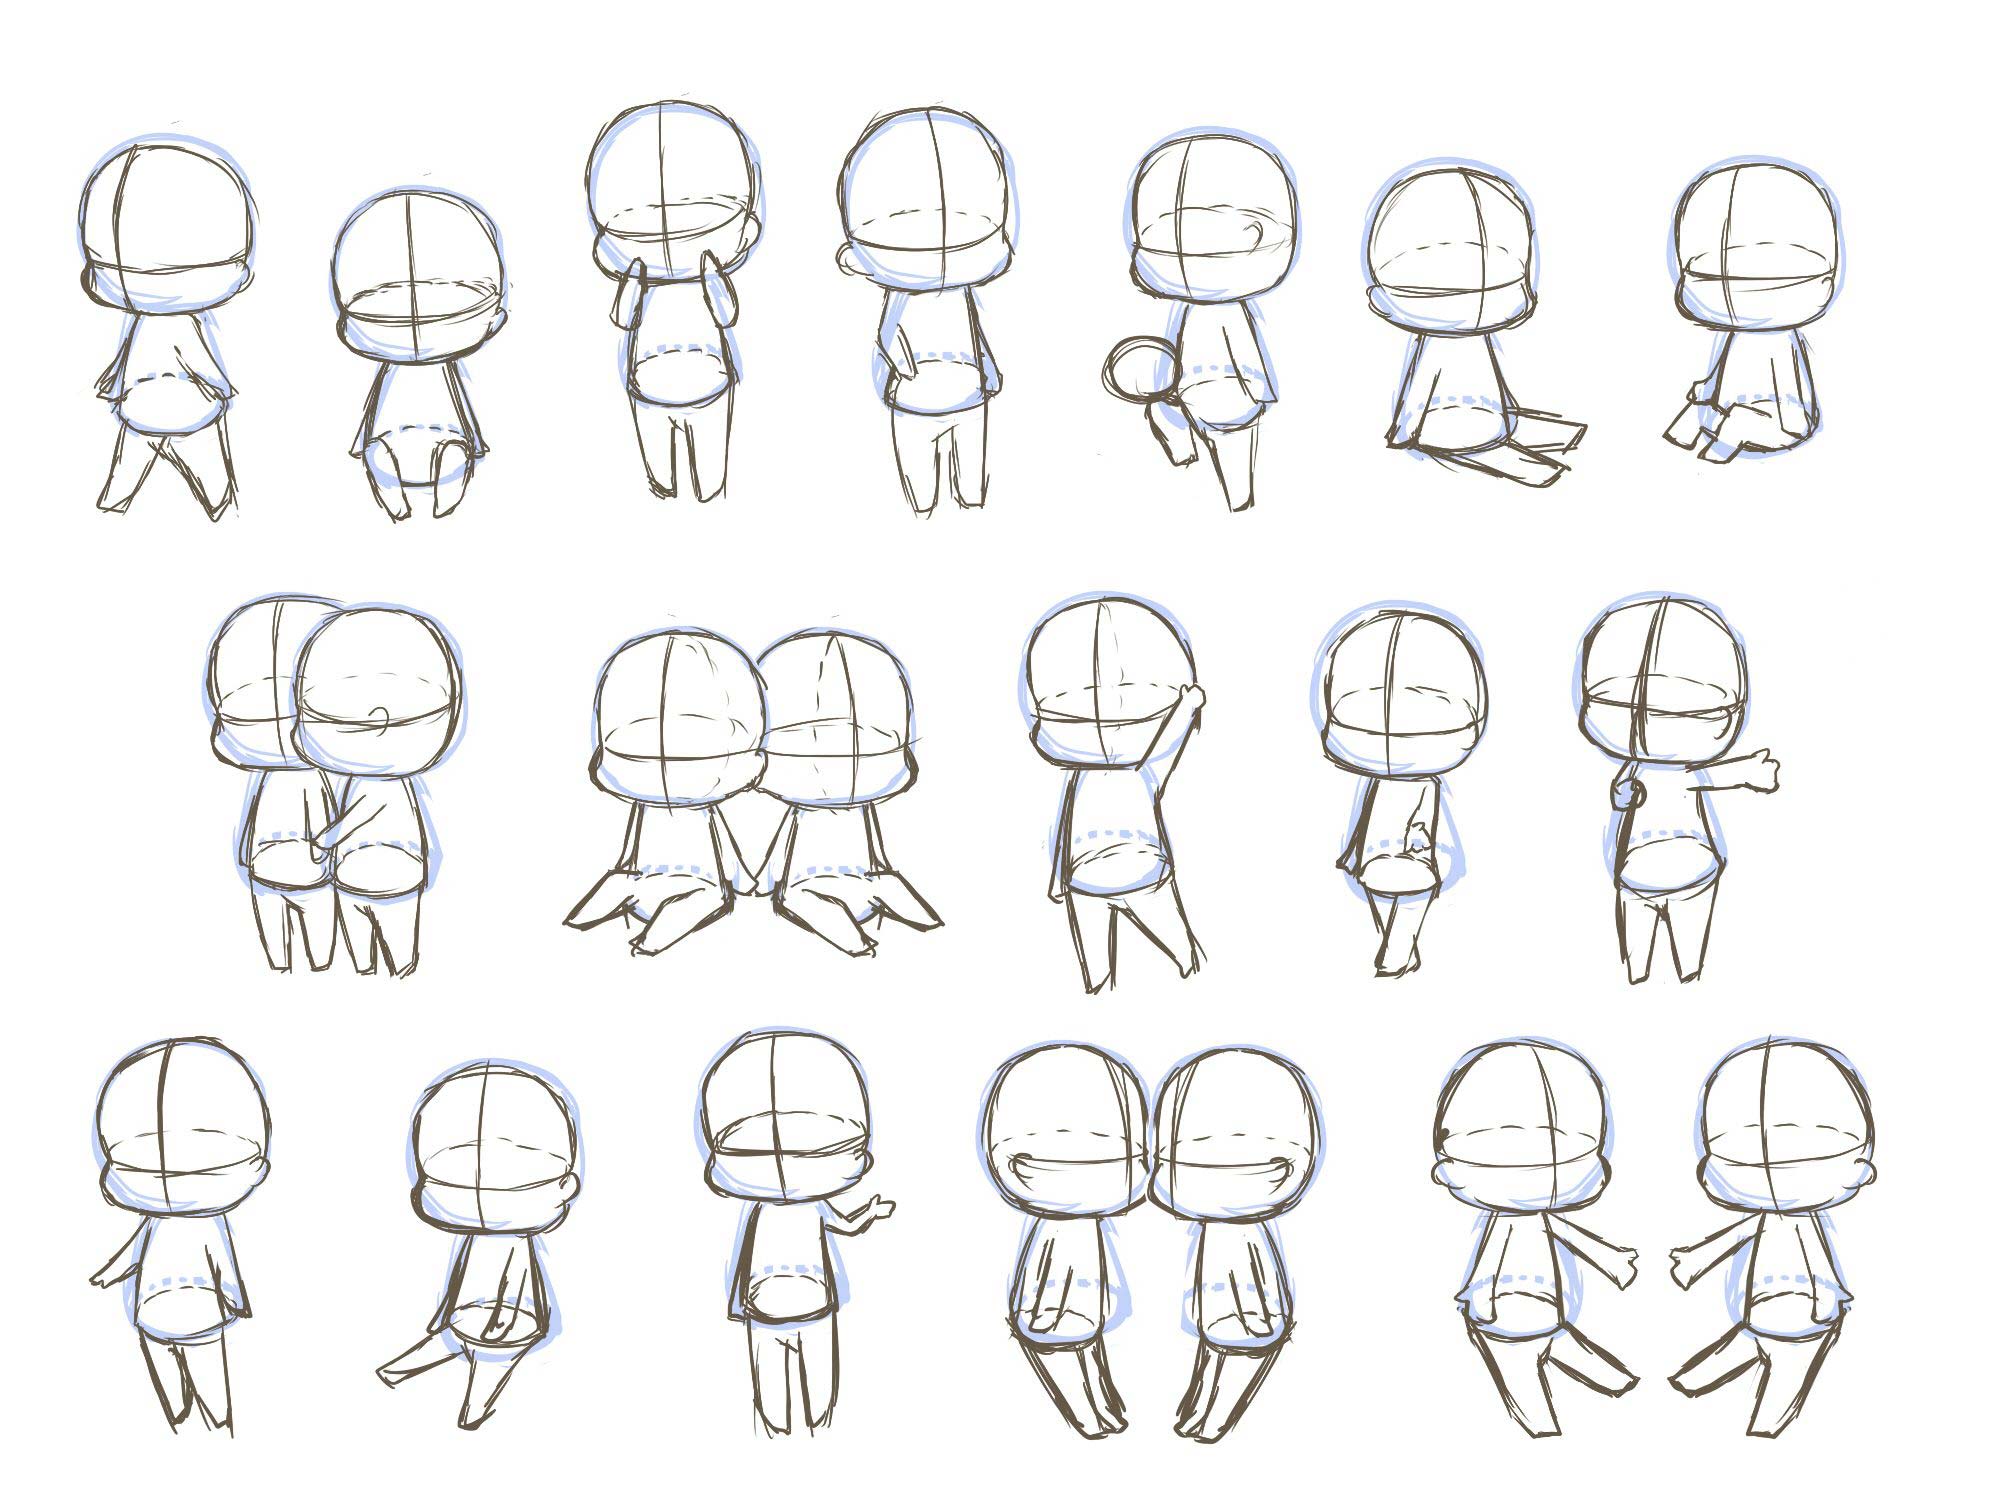 Chibi Drawing Reference And Sketches For Artists Deviantart is the world's largest online the complete set includes 6 male figures standing on both legs with various hand gestures. chibi drawing reference and sketches